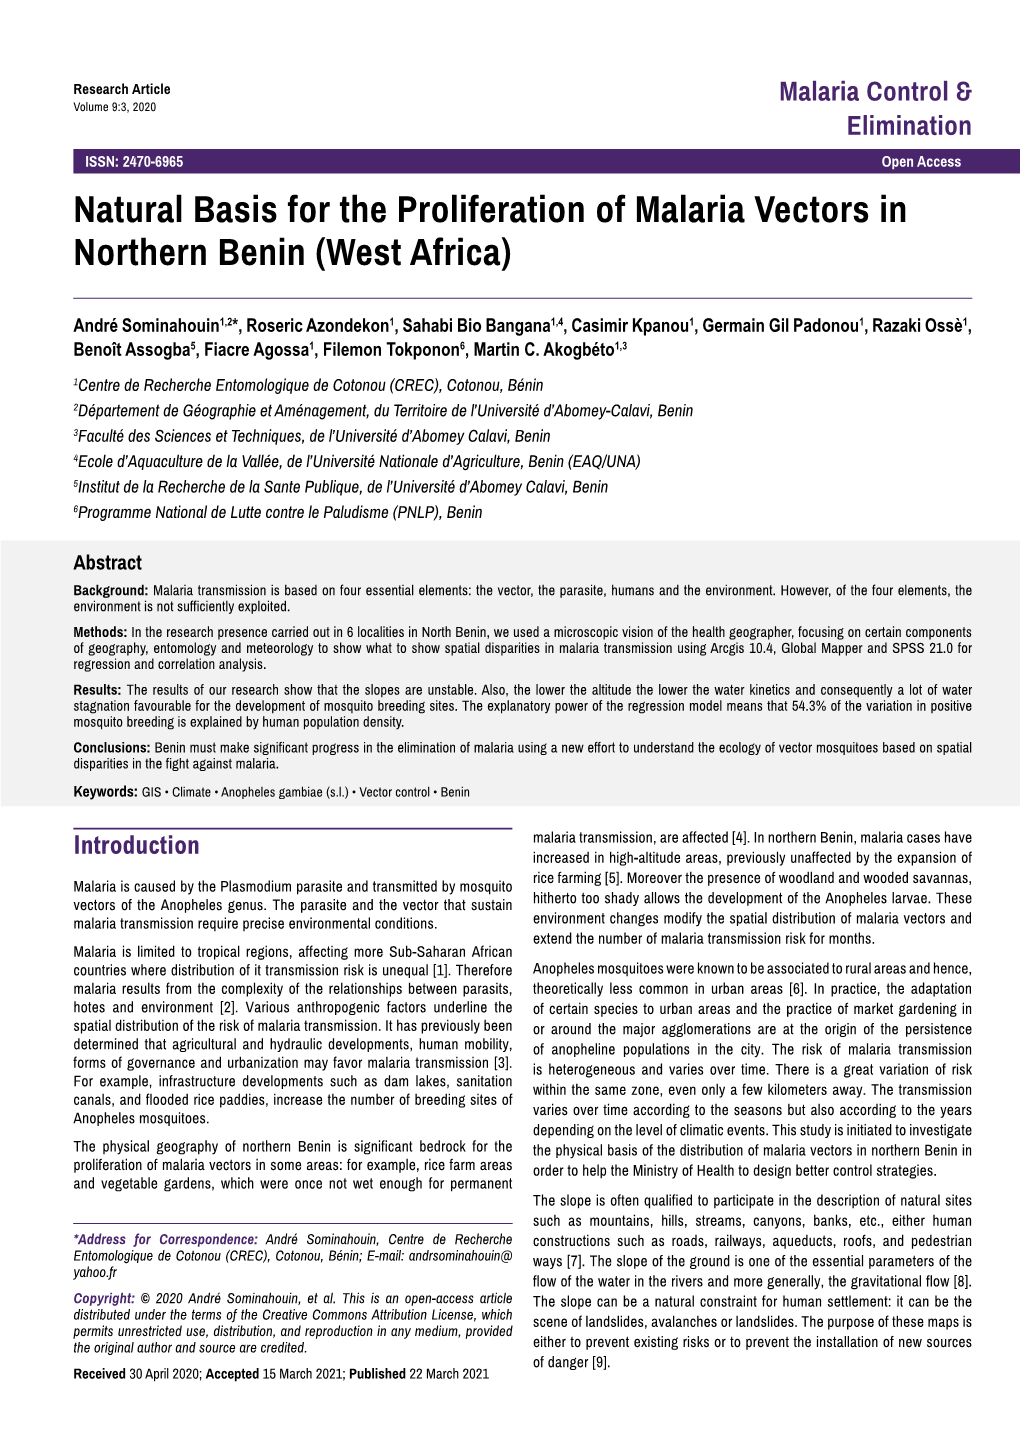 Natural Basis for the Proliferation of Malaria Vectors in Northern Benin (West Africa)